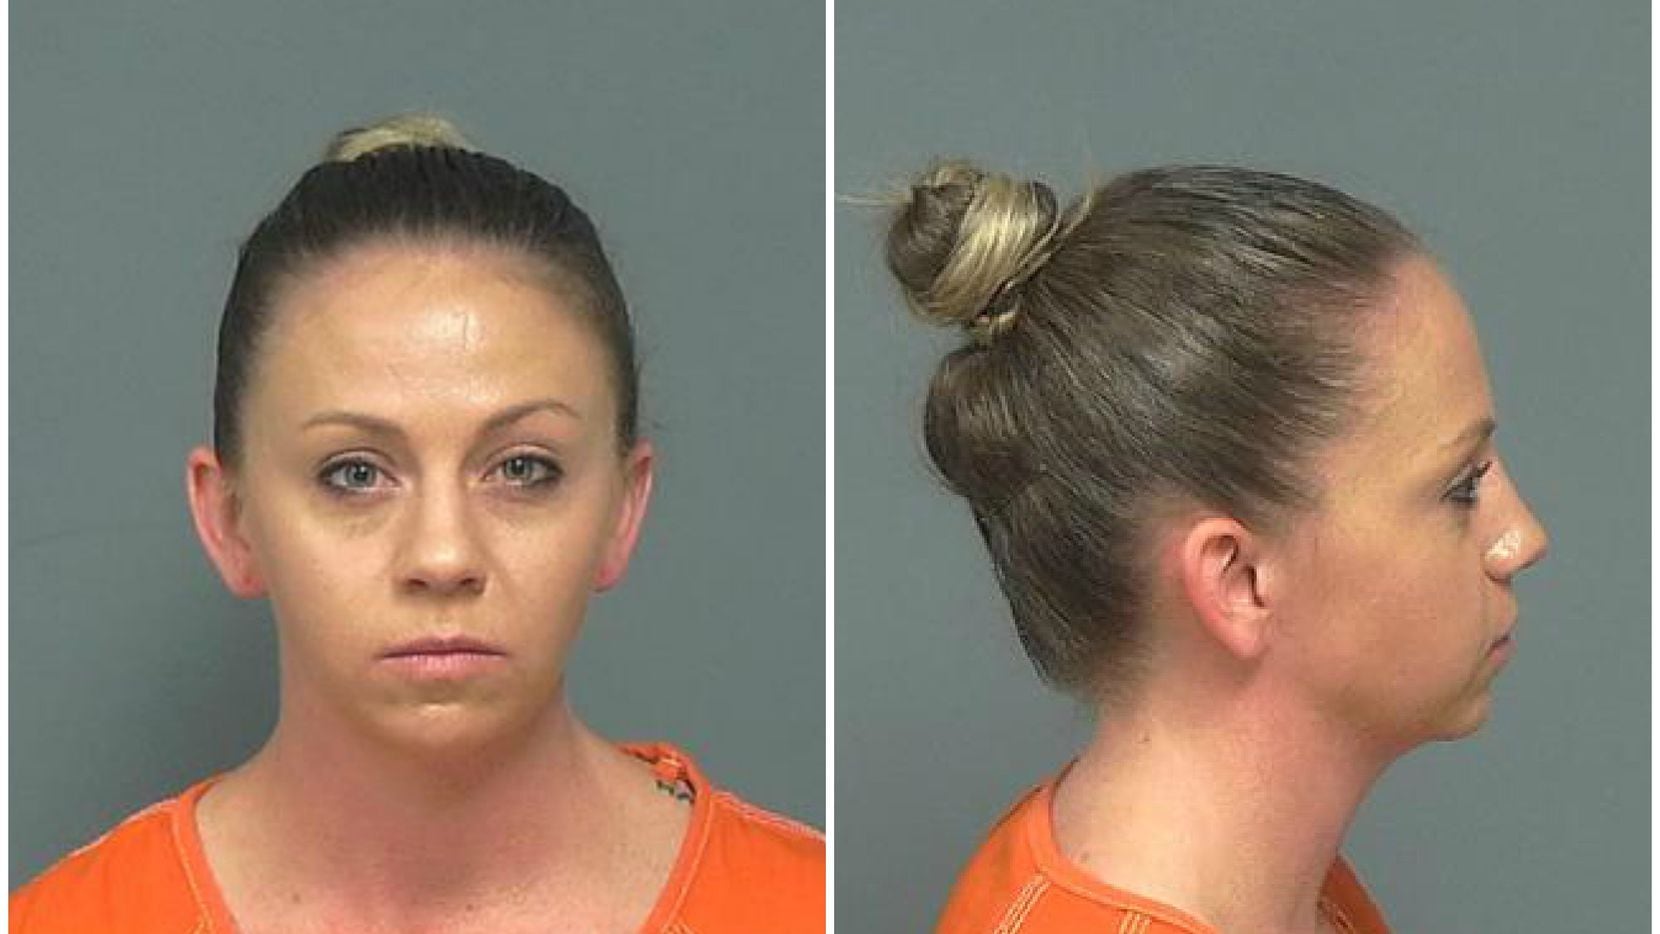 Amber Guyger, 30, was booked into the Mesquite Jail on Friday and quickly released on bond.